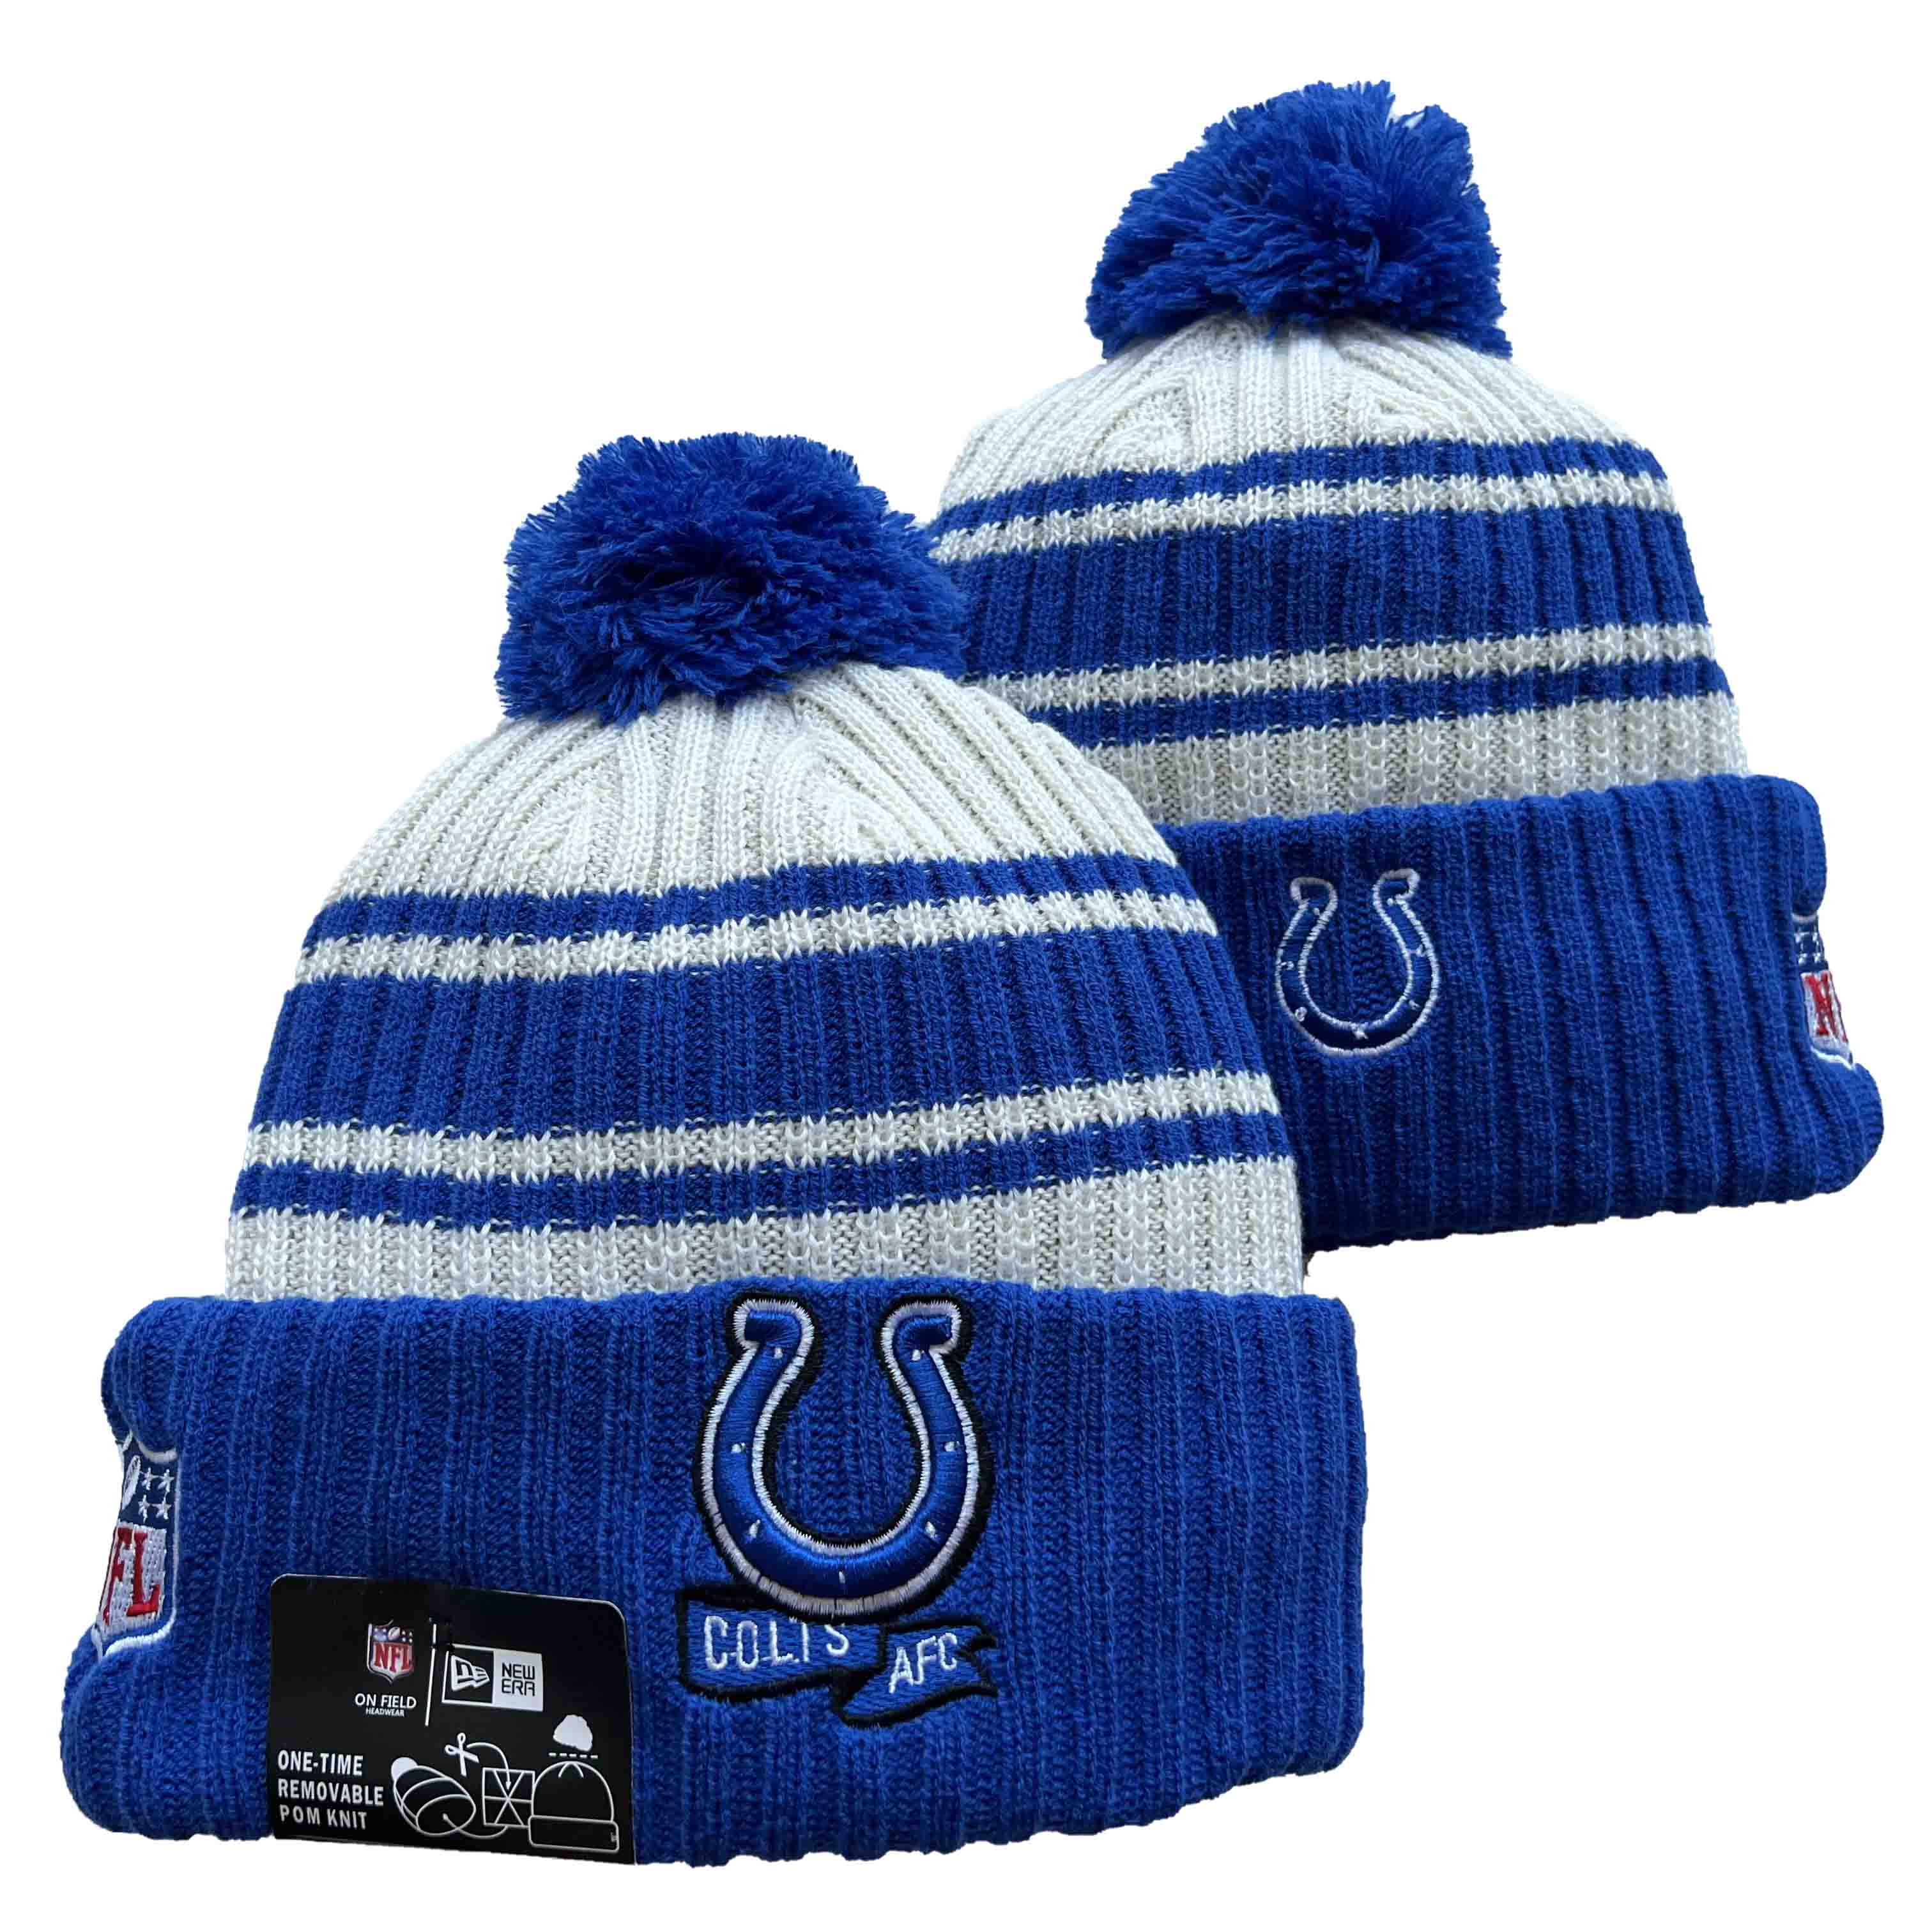 NFL Indianapolis Colts Beanies Knit Hats-YD1003